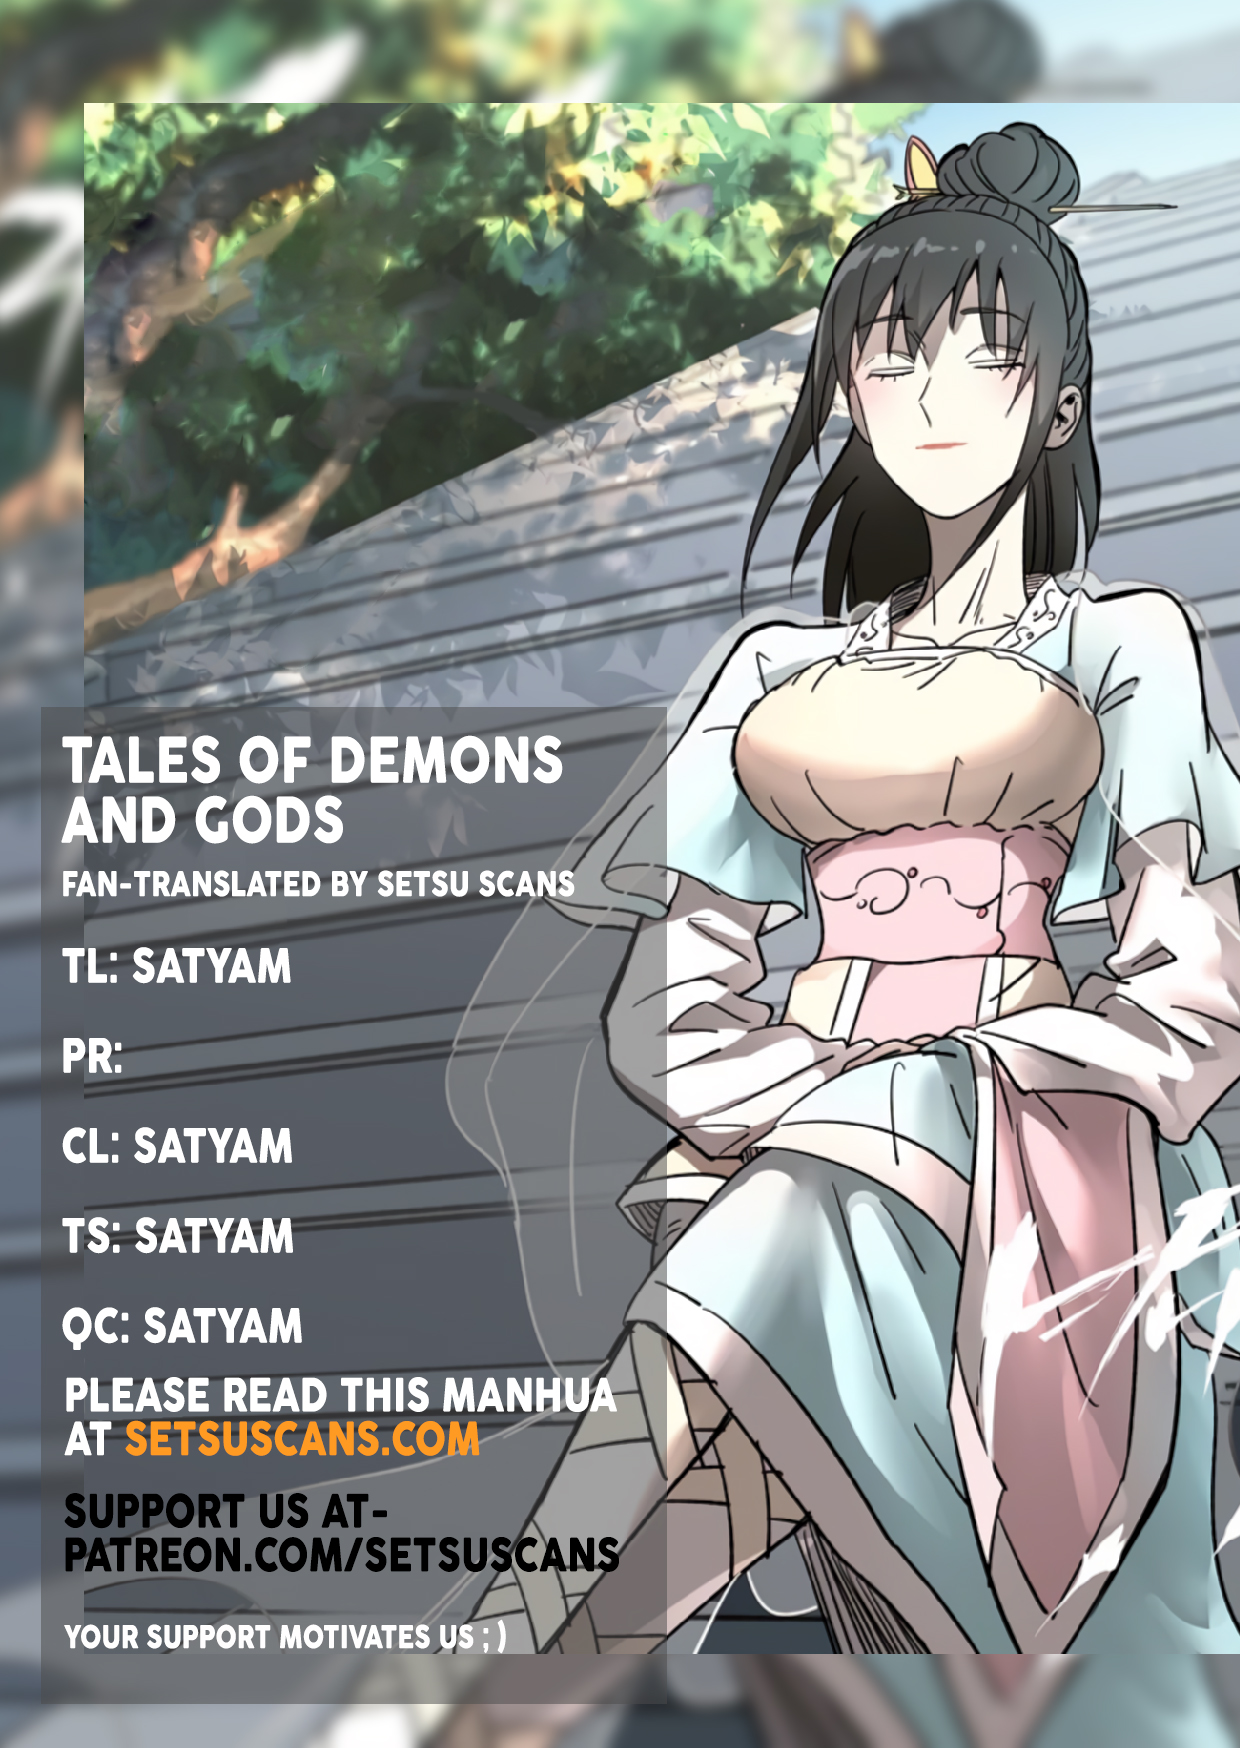 Tales of Demons and Gods - Chapter 28322 - Capturing Nie Li (1) - Image 1